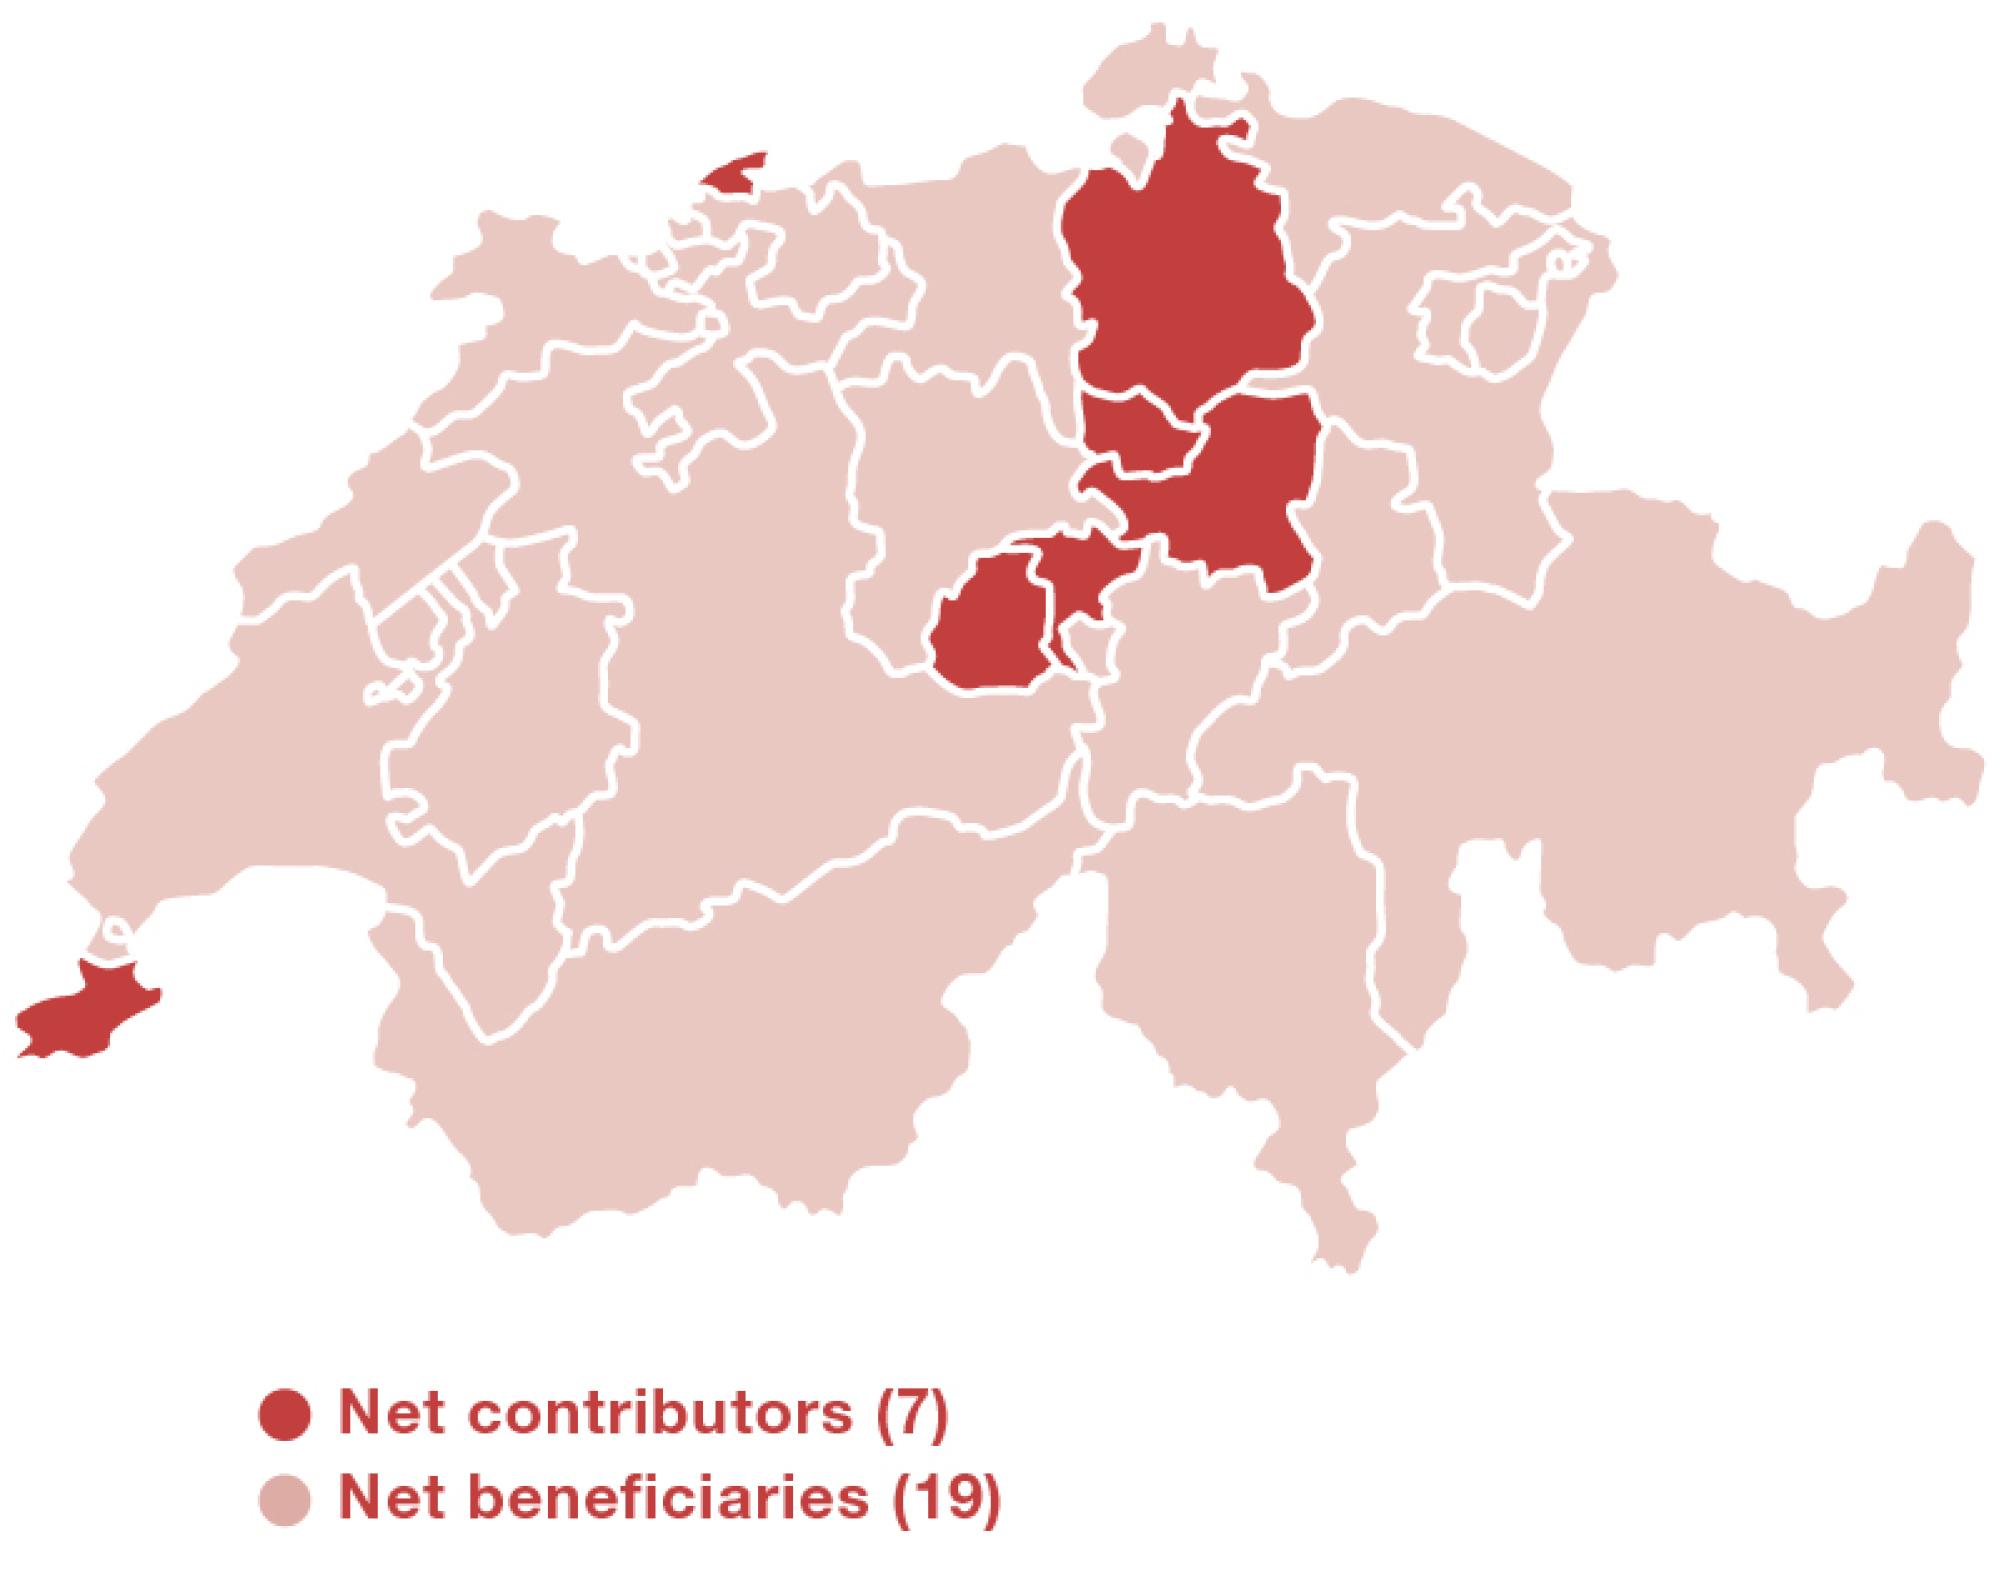 Map of Switzerland with outline of the Cantons. The contributing cantons are marked in dark. These are Zug, Schwyz, Nidwalden, Geneva, Basel-City, Zürich and Obwalden.